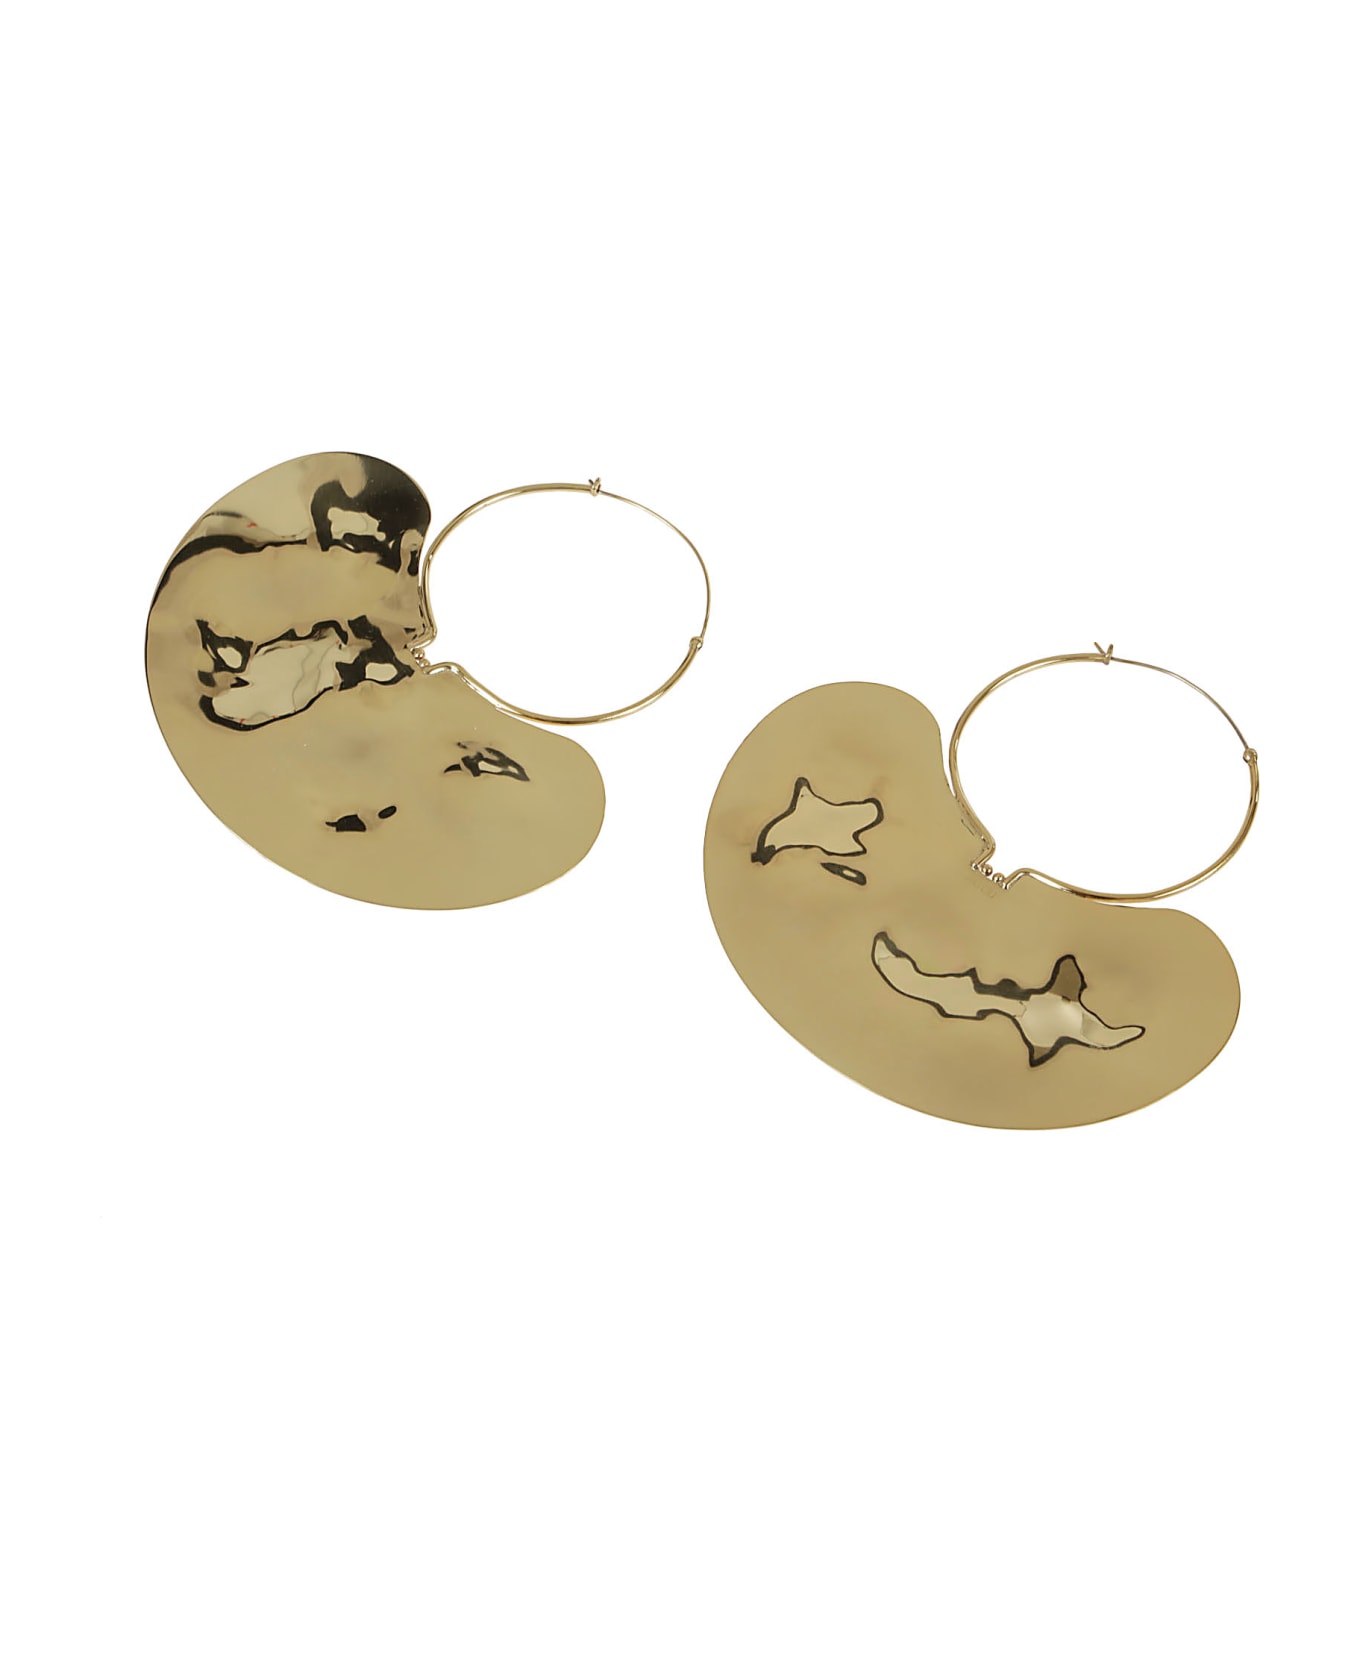 Patou Iconic Large Hoop Earring - G Gold